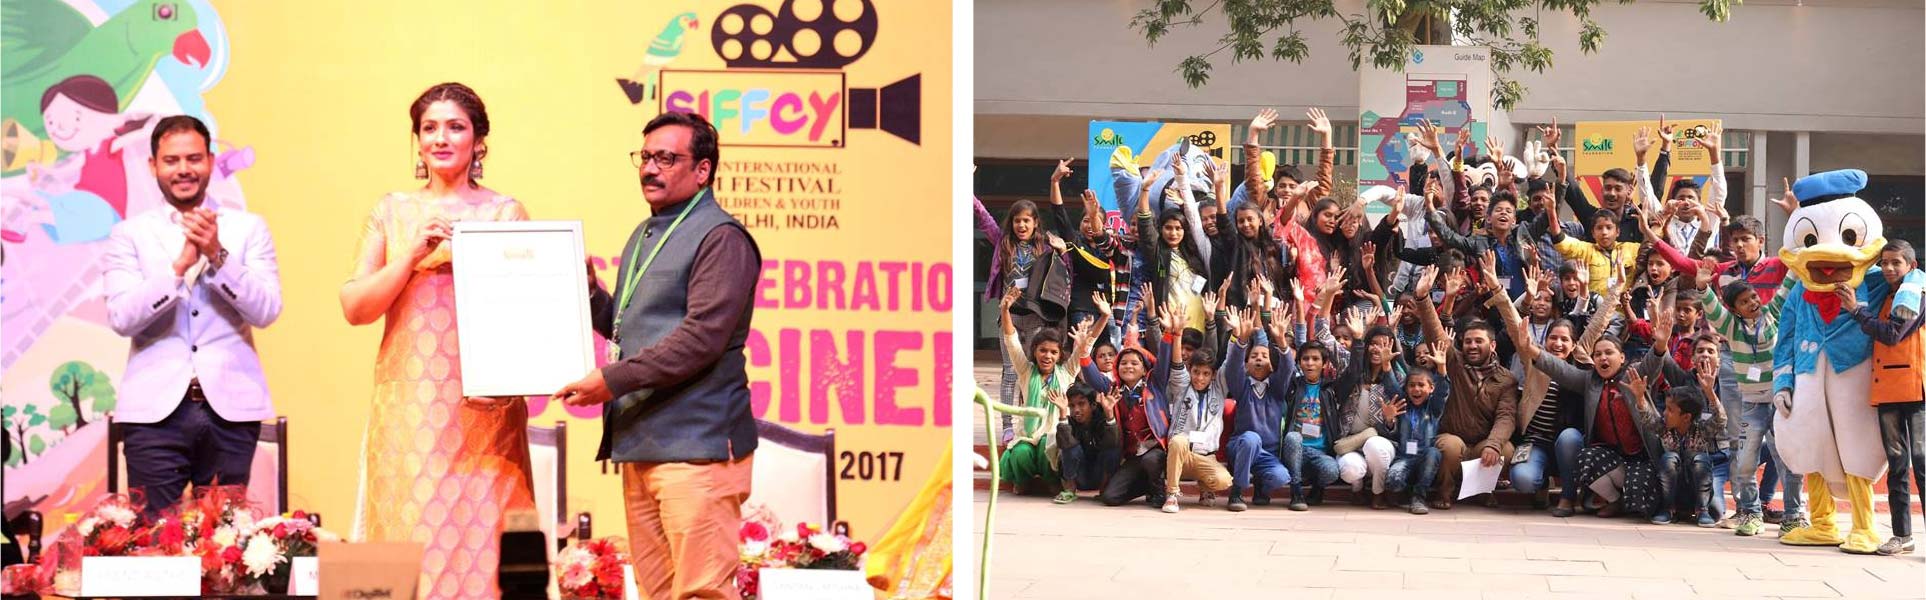 Third Edition of Smile International Film Festival for Children and Youth concludes